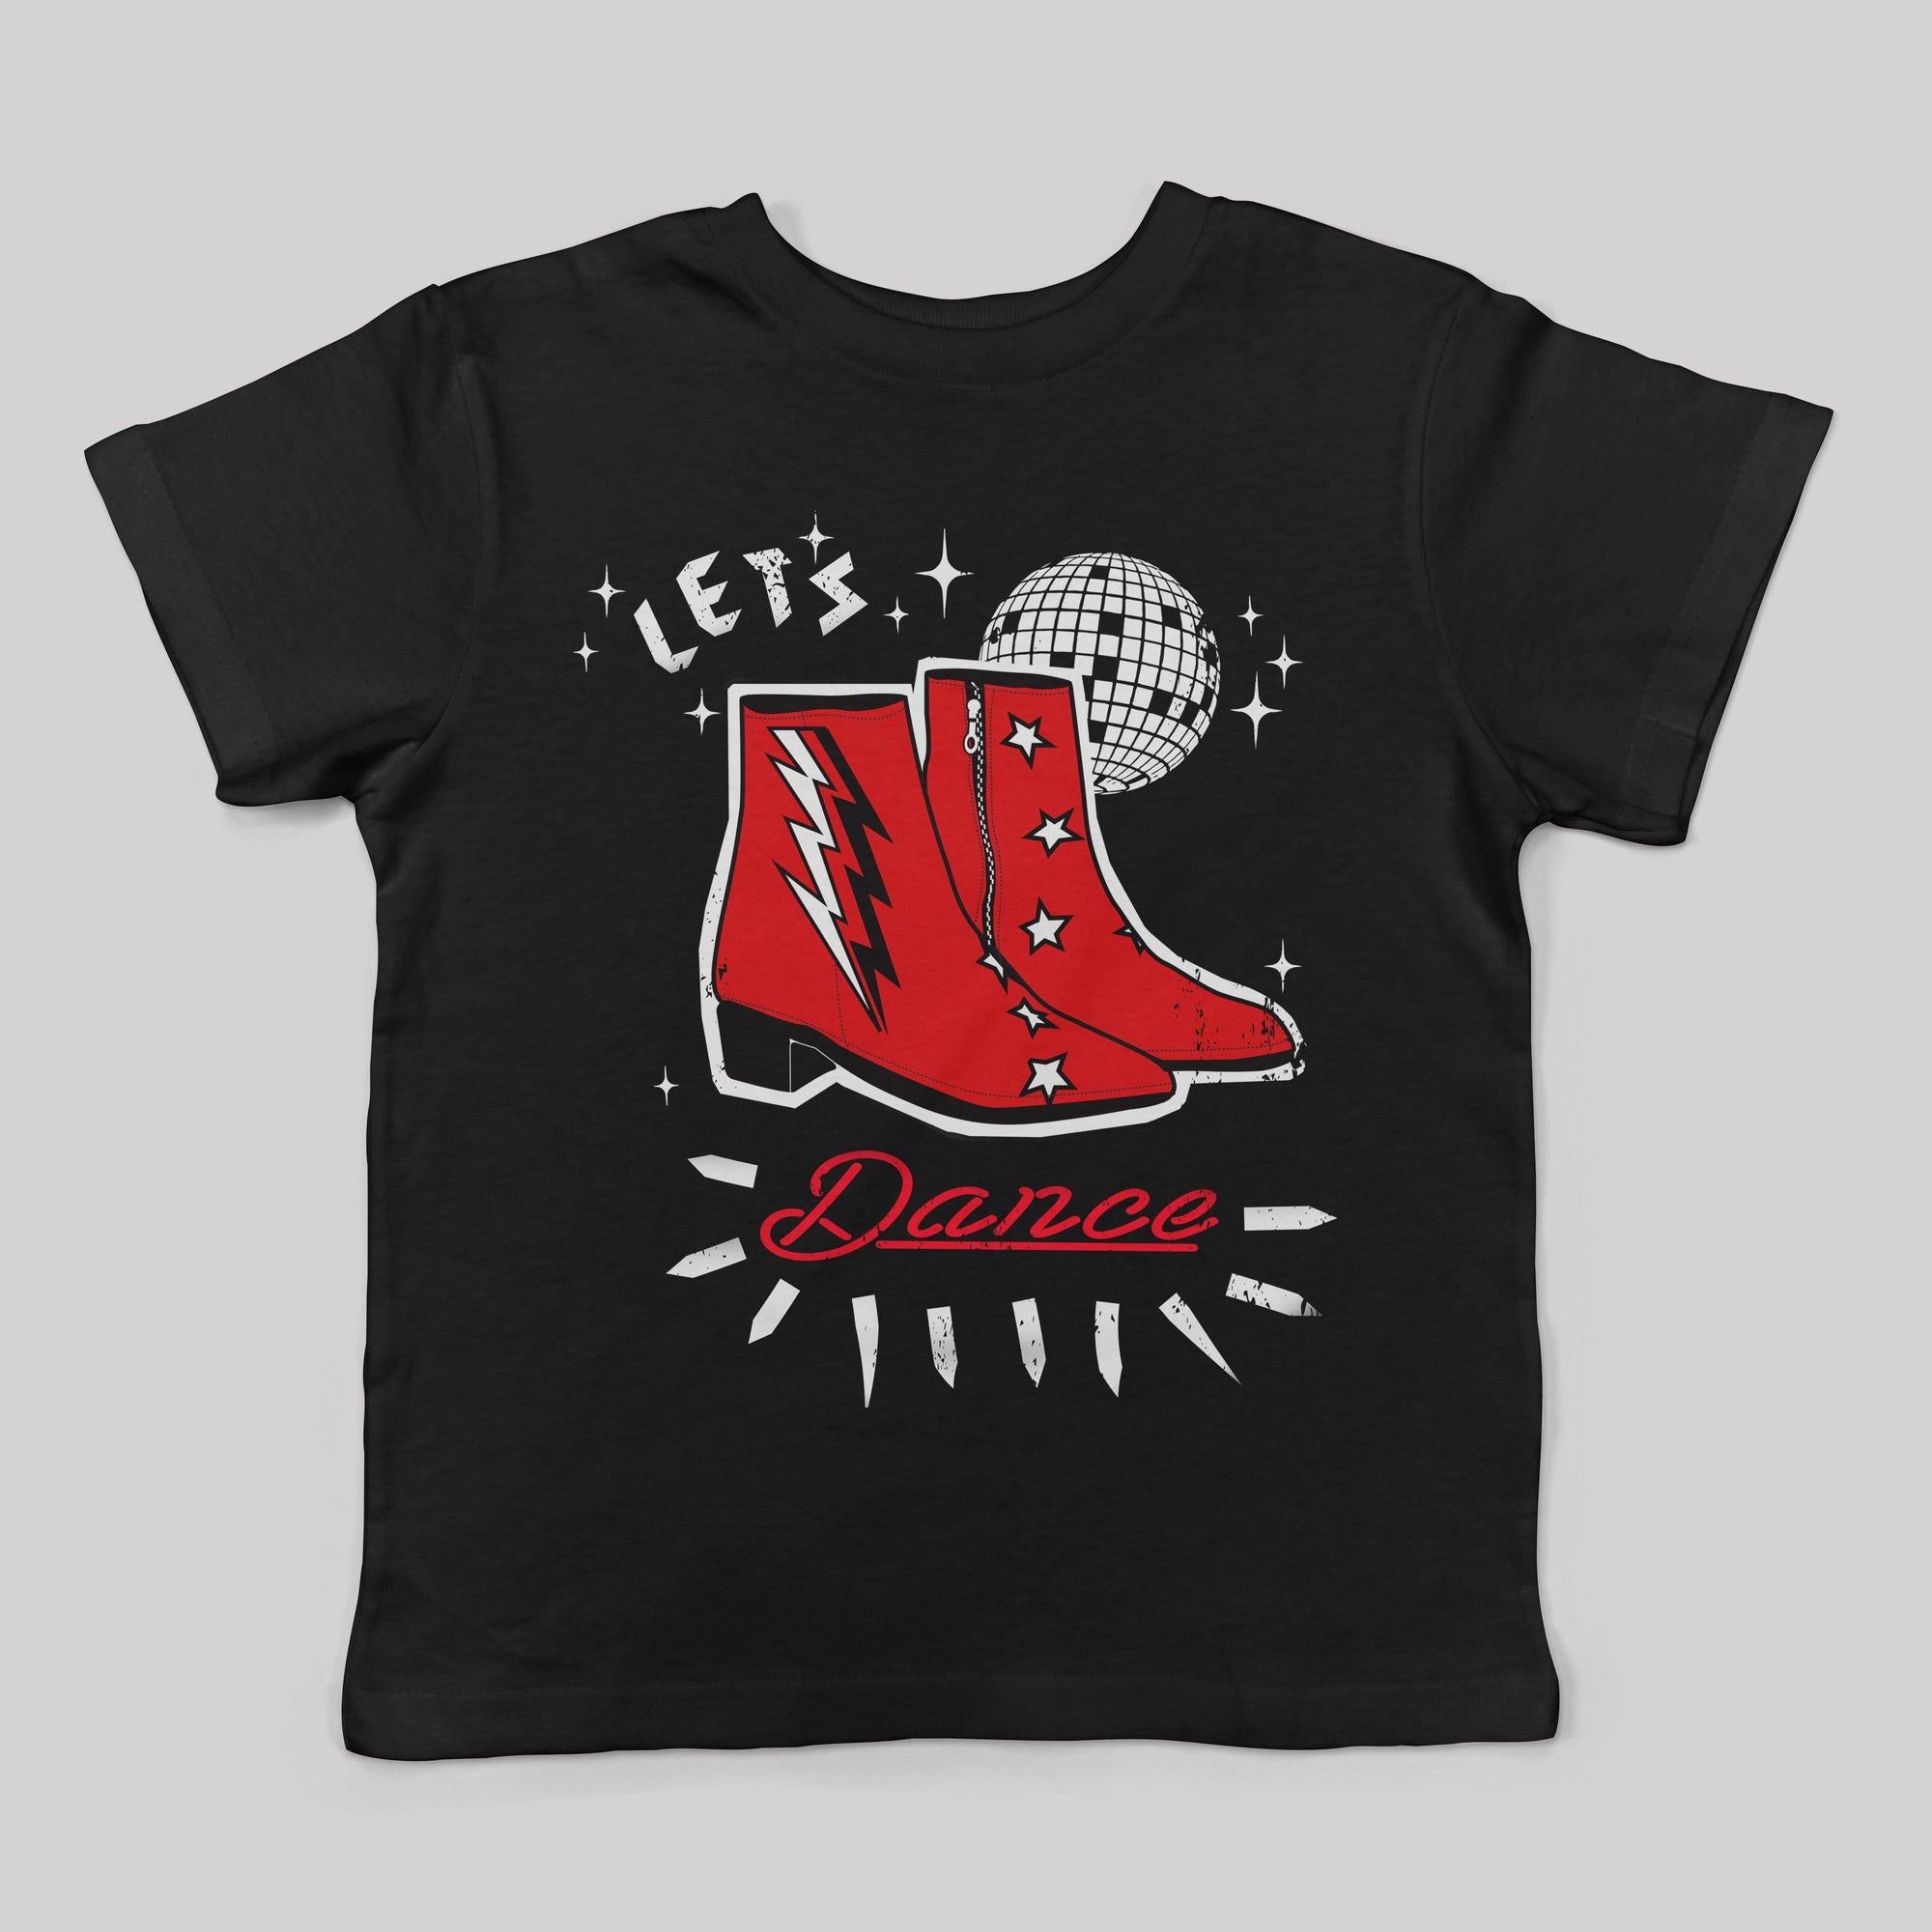 "Let's Dance" Tee for Kids - Baby Teith